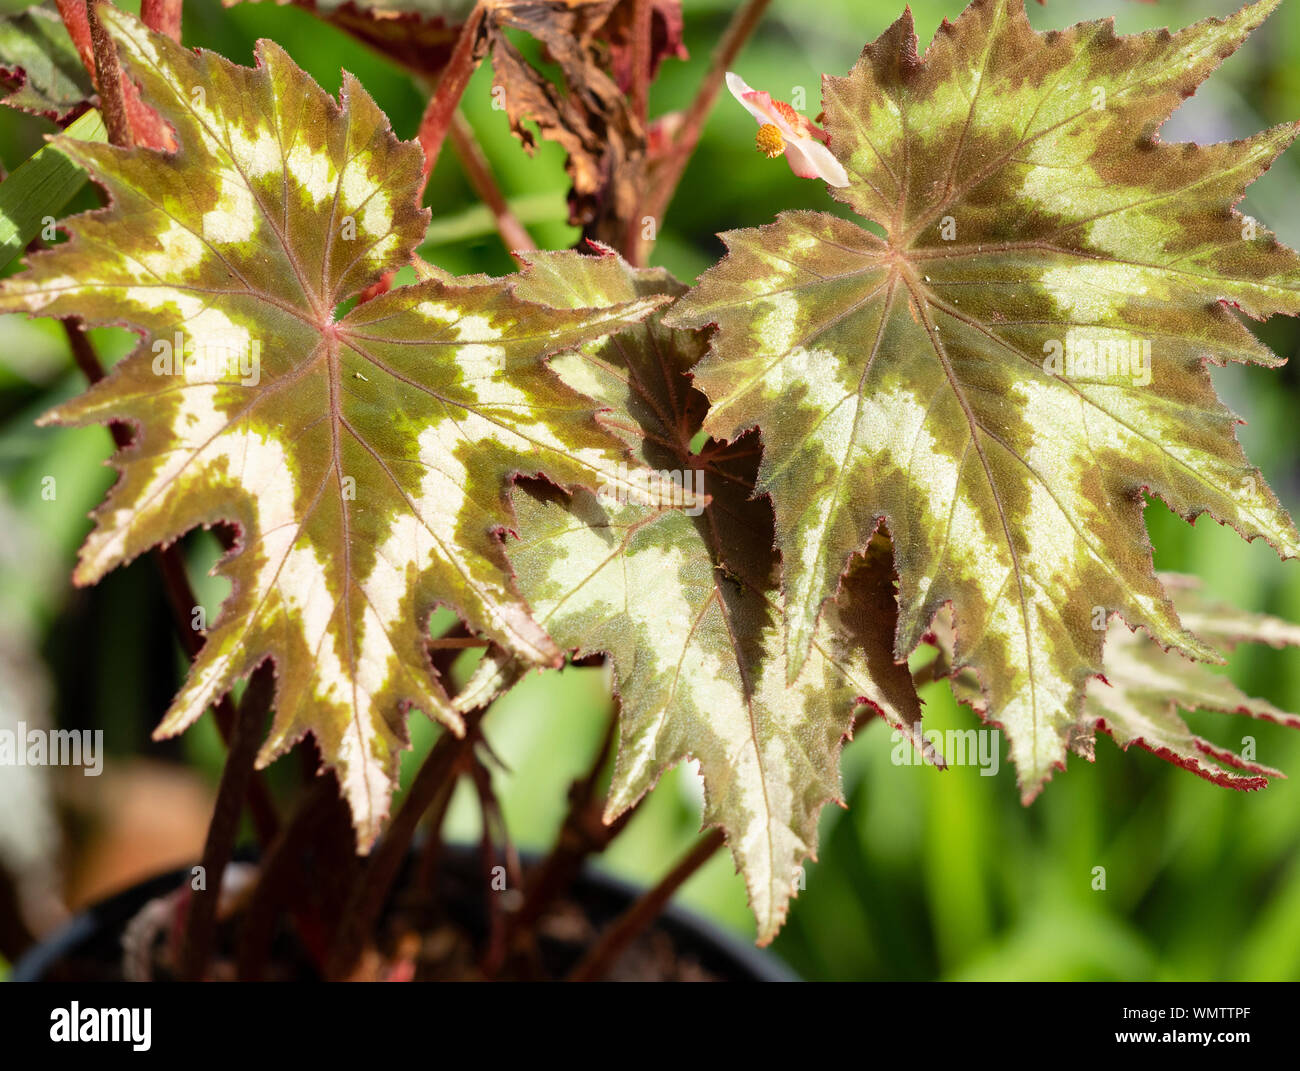 Serrated, patterned foliage of the half hardy perennial, Begonia palmata 'Tie Dye' Stock Photo